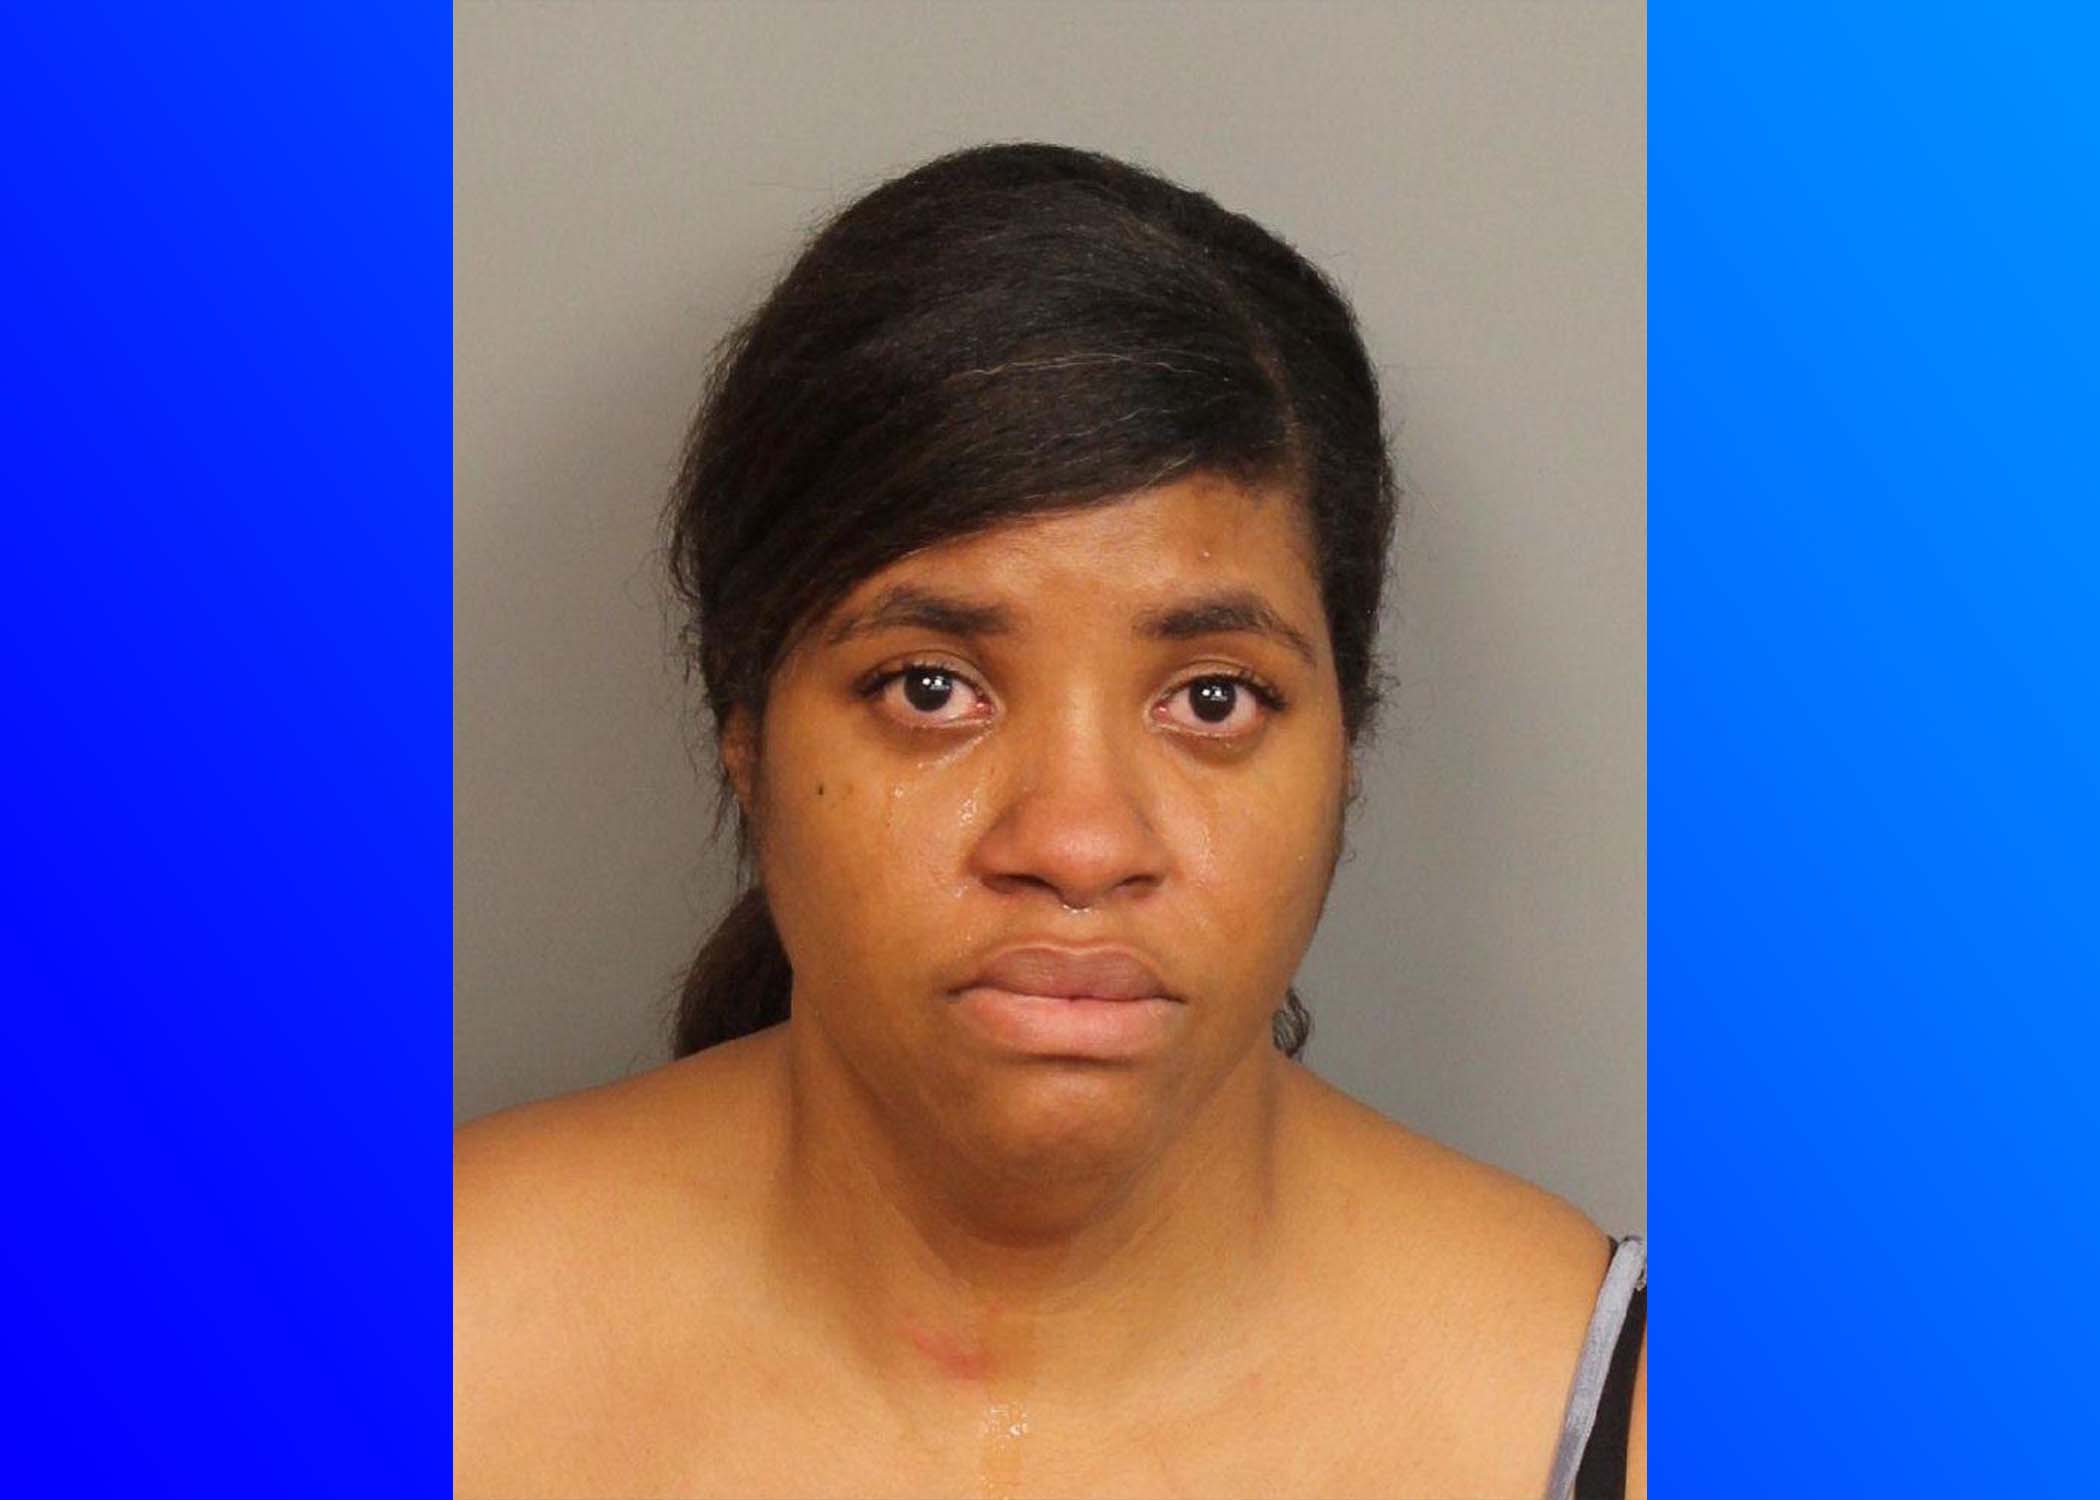 Woman arrested after altercation with 11-year-old on school bus in Center Point